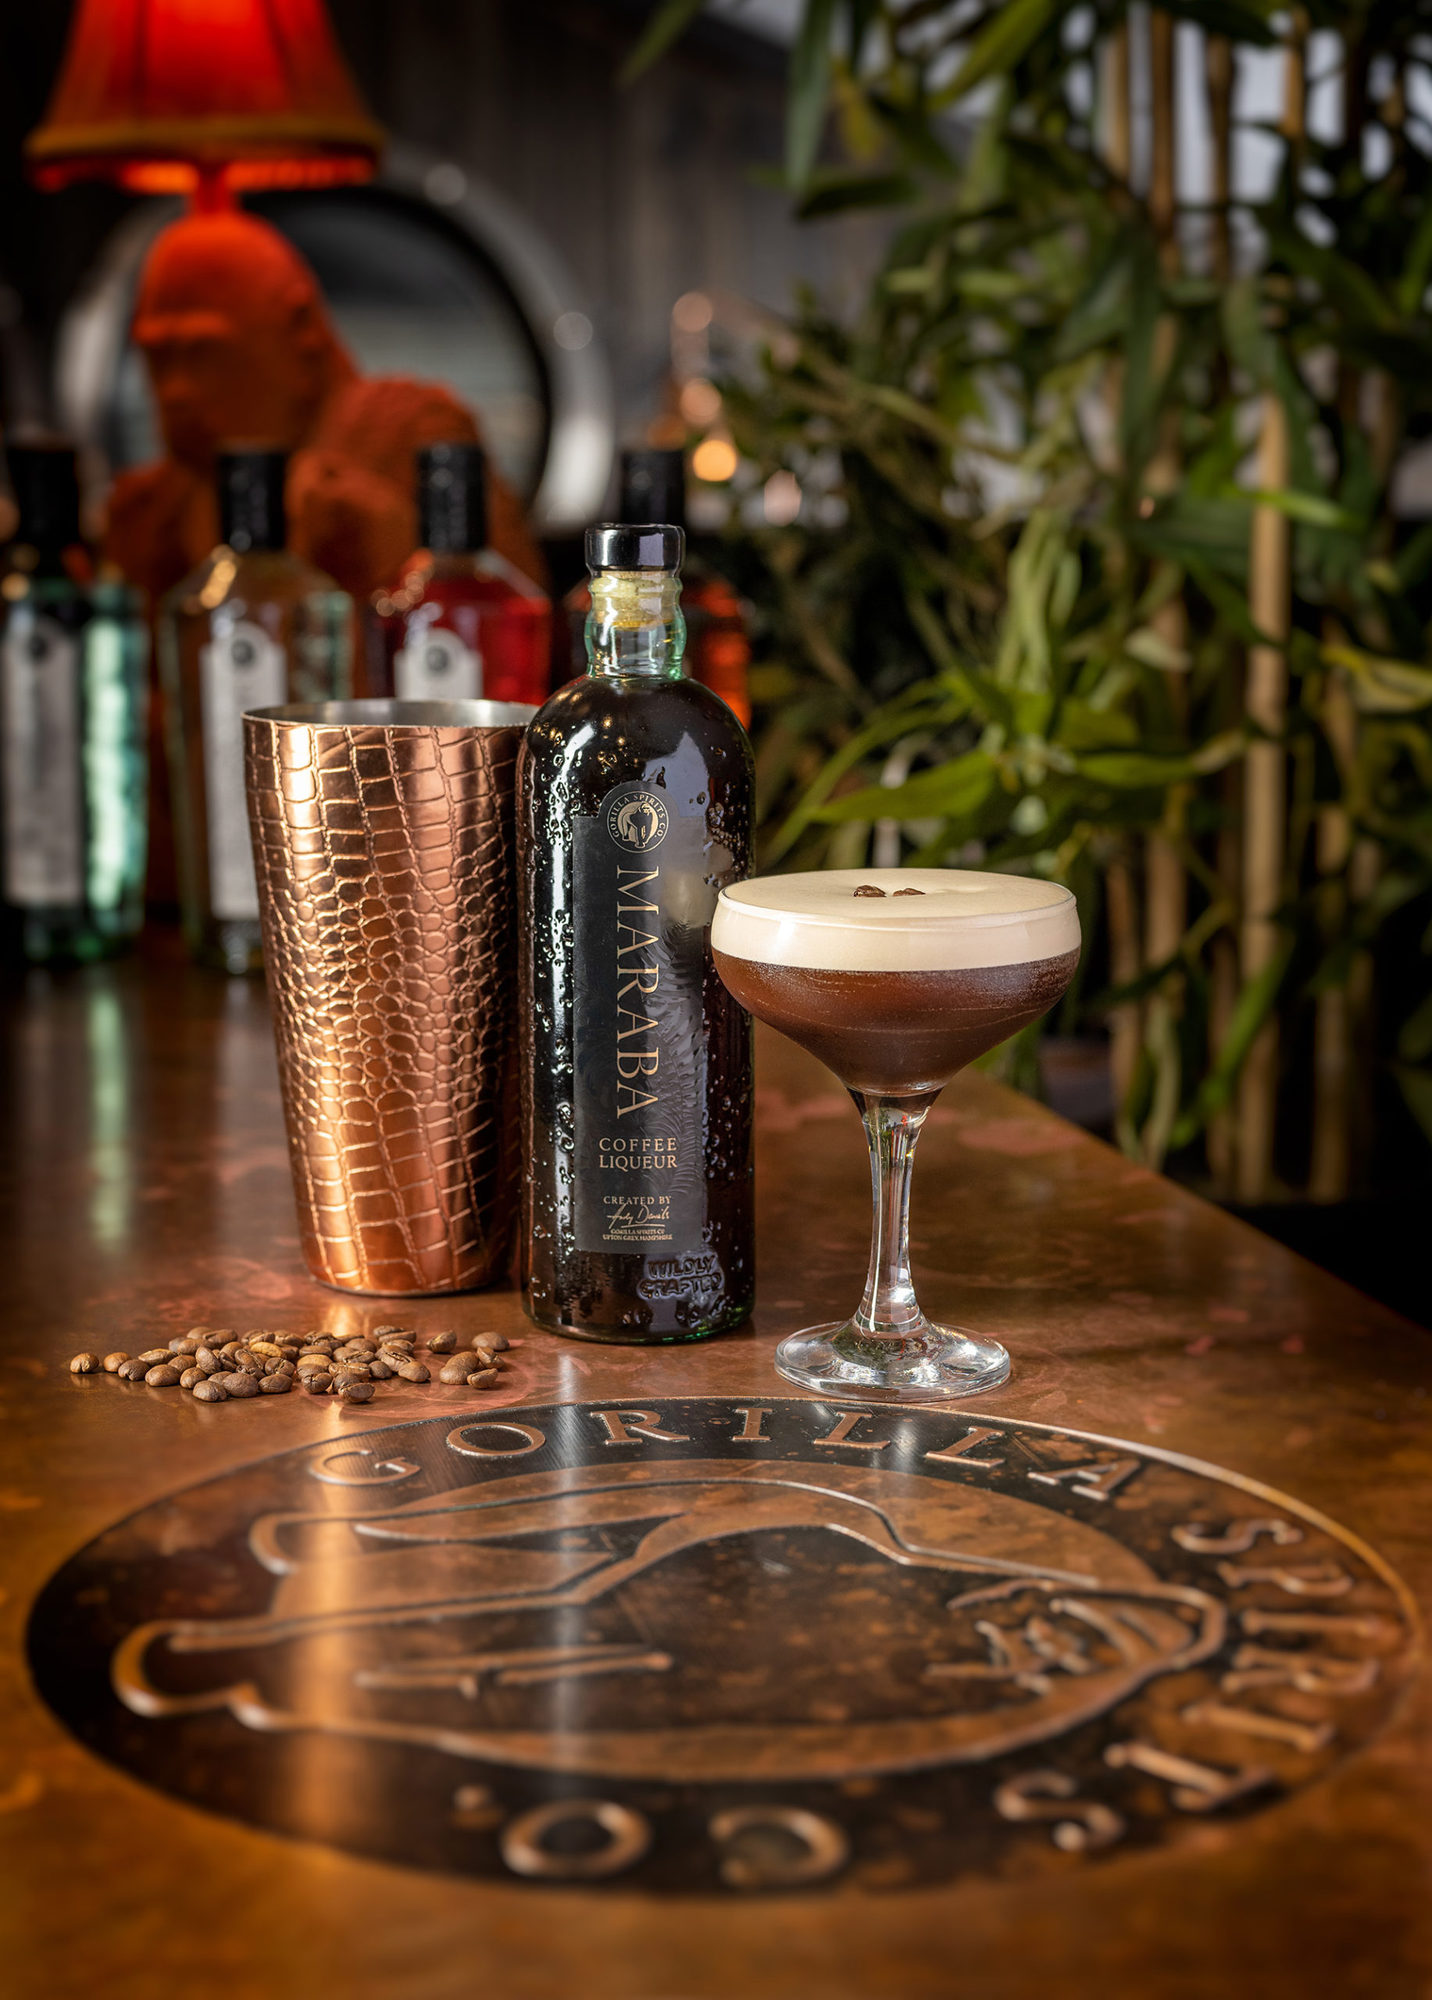 An espresso martini on a bar next to a bottle of Gorilla Spirits and a shaker.